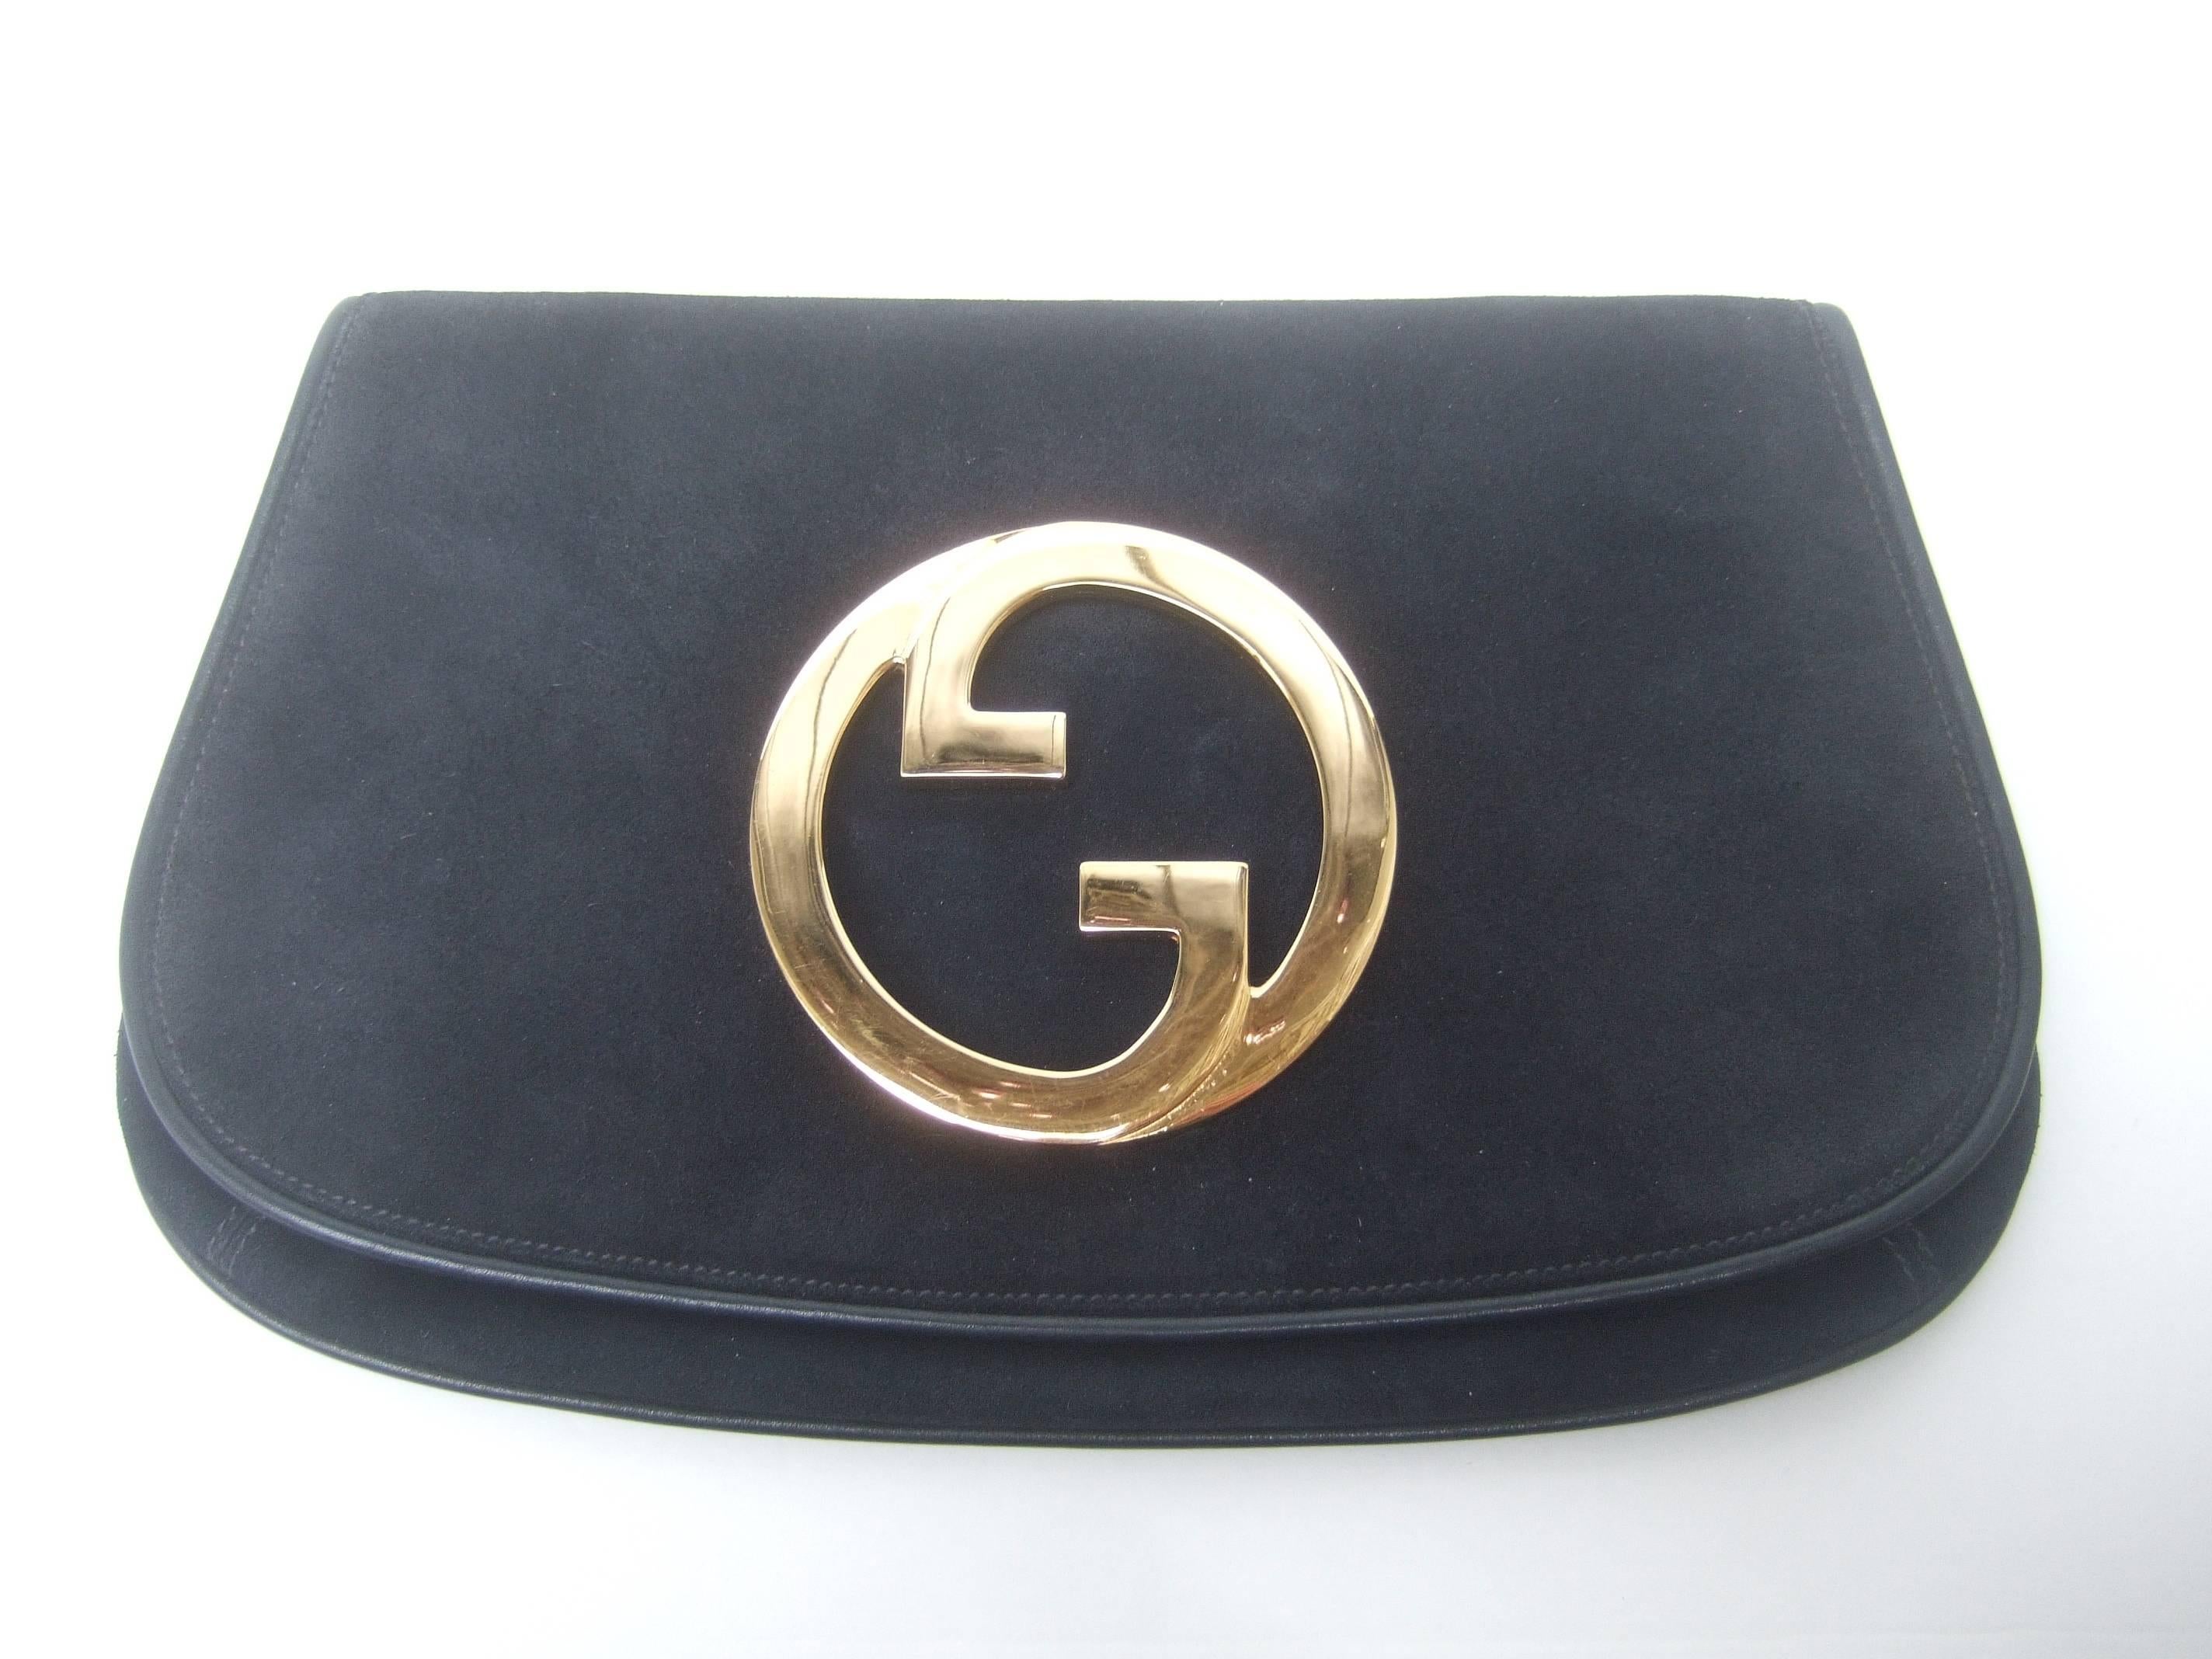 Gucci Italy Black suede blondie clutch bag ca 1970s
The iconic clutch bag is covered with plush
doeskin suede

The Italian clutch is adorned with Gucci's 
massive gilt metal interlocked initials 
Framed with subtle black leather piping

The